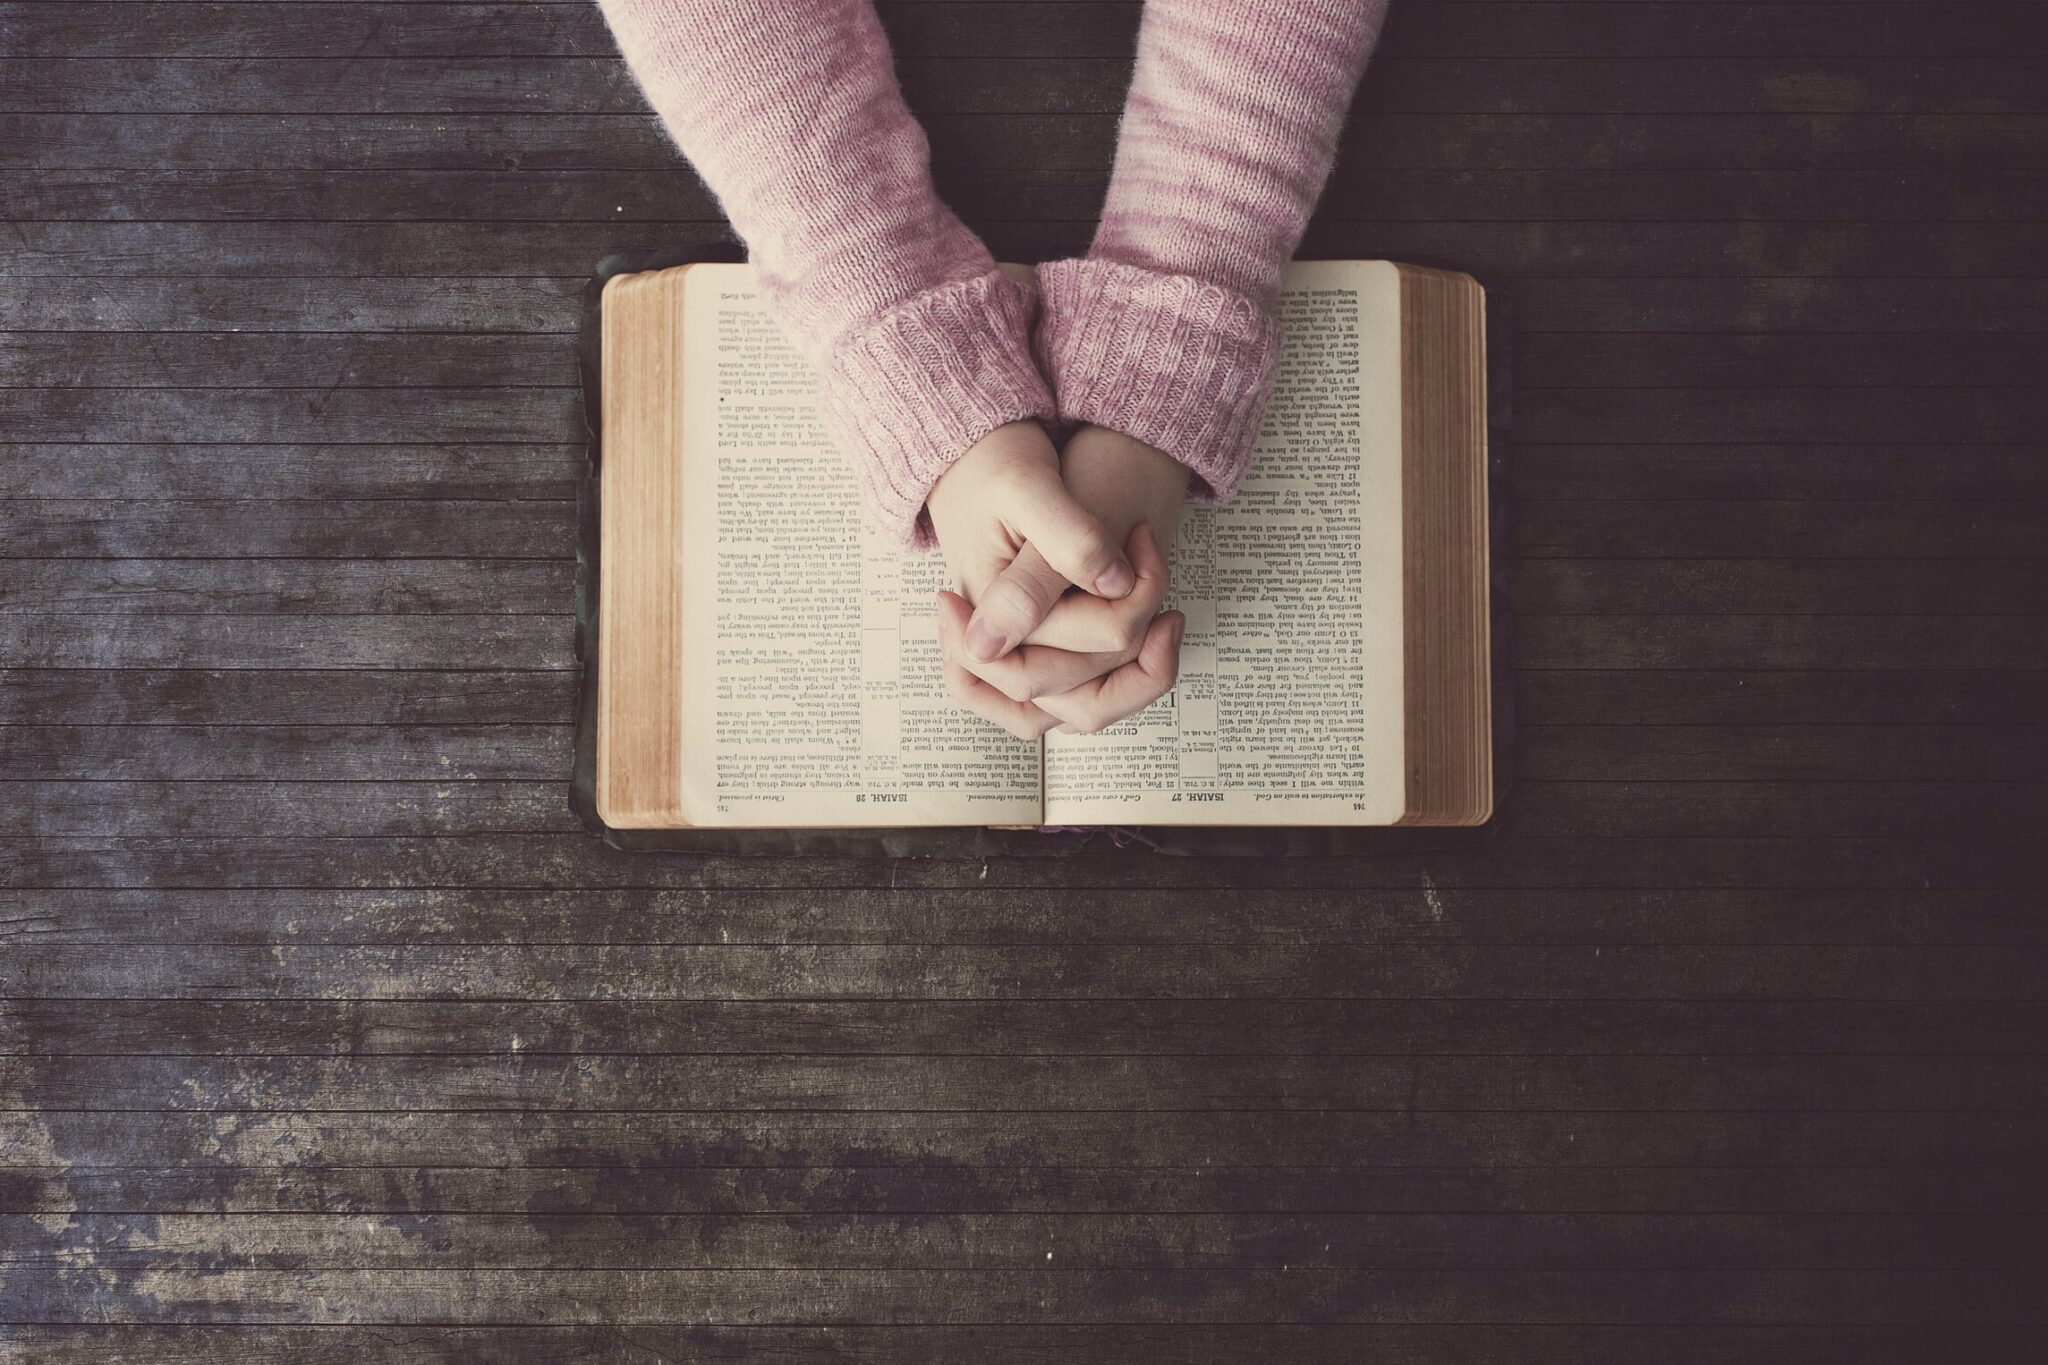 Hands folded together resting on a Bible